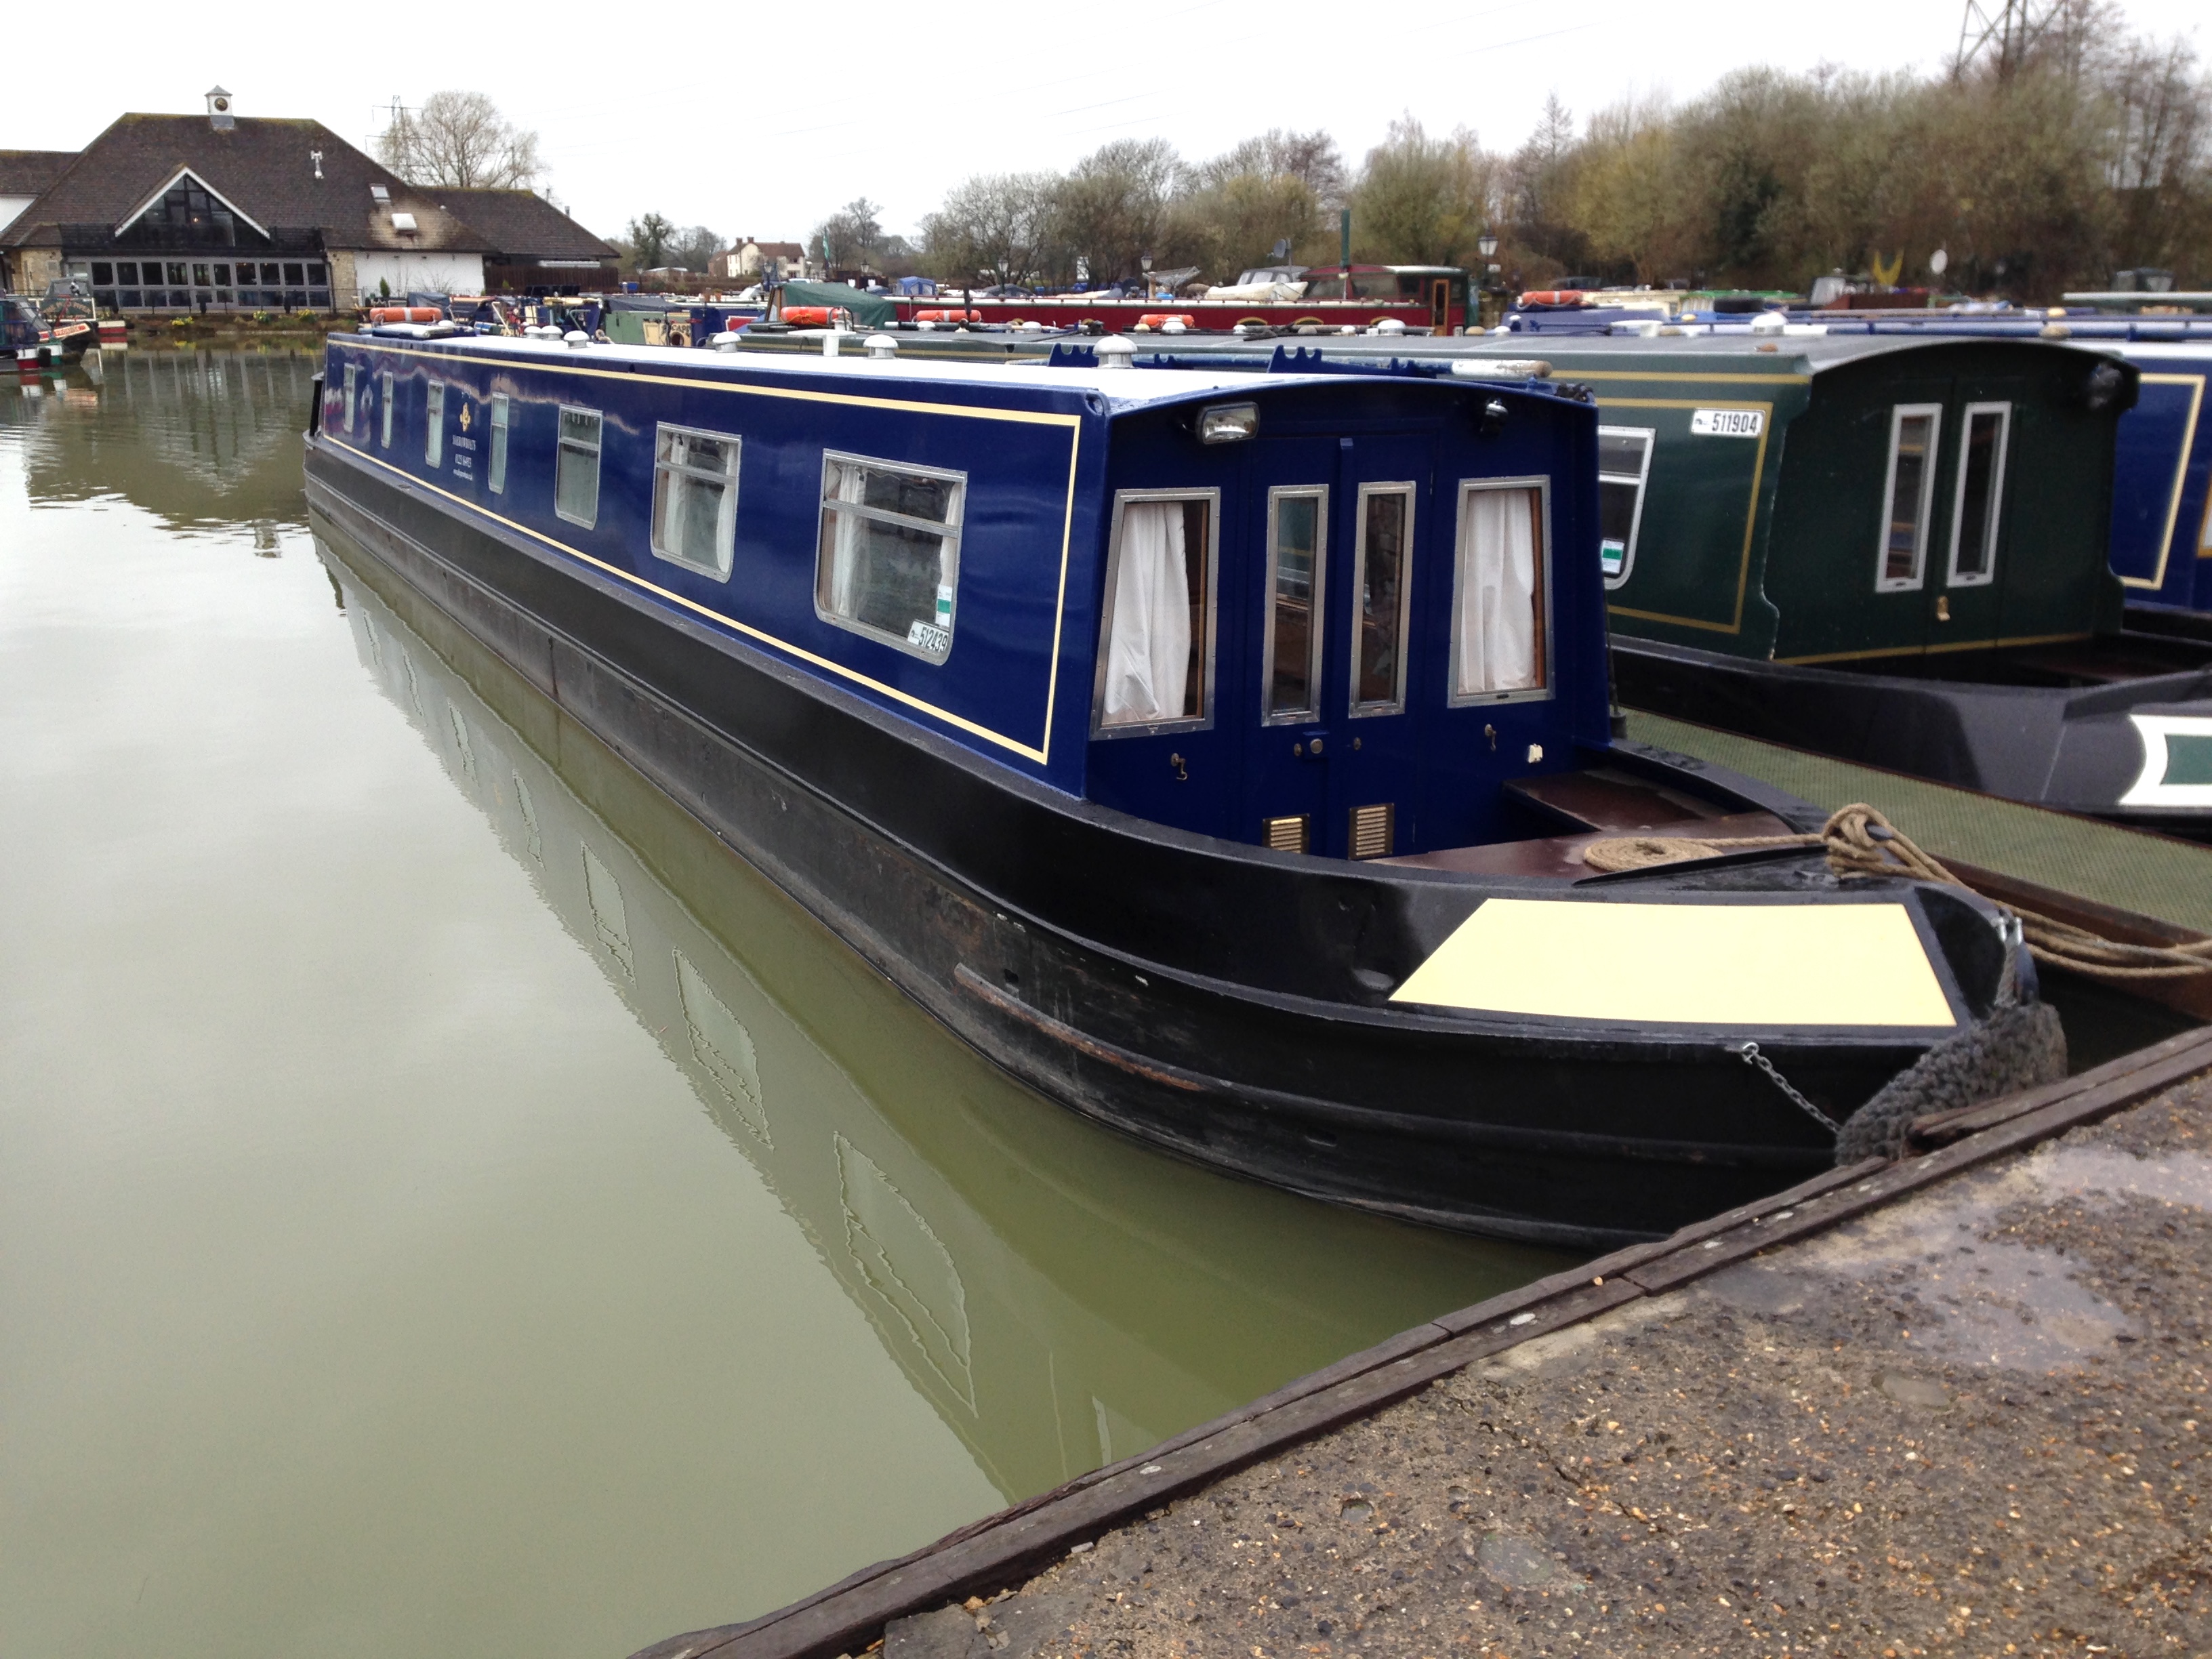 The S-Hannah class canal boat